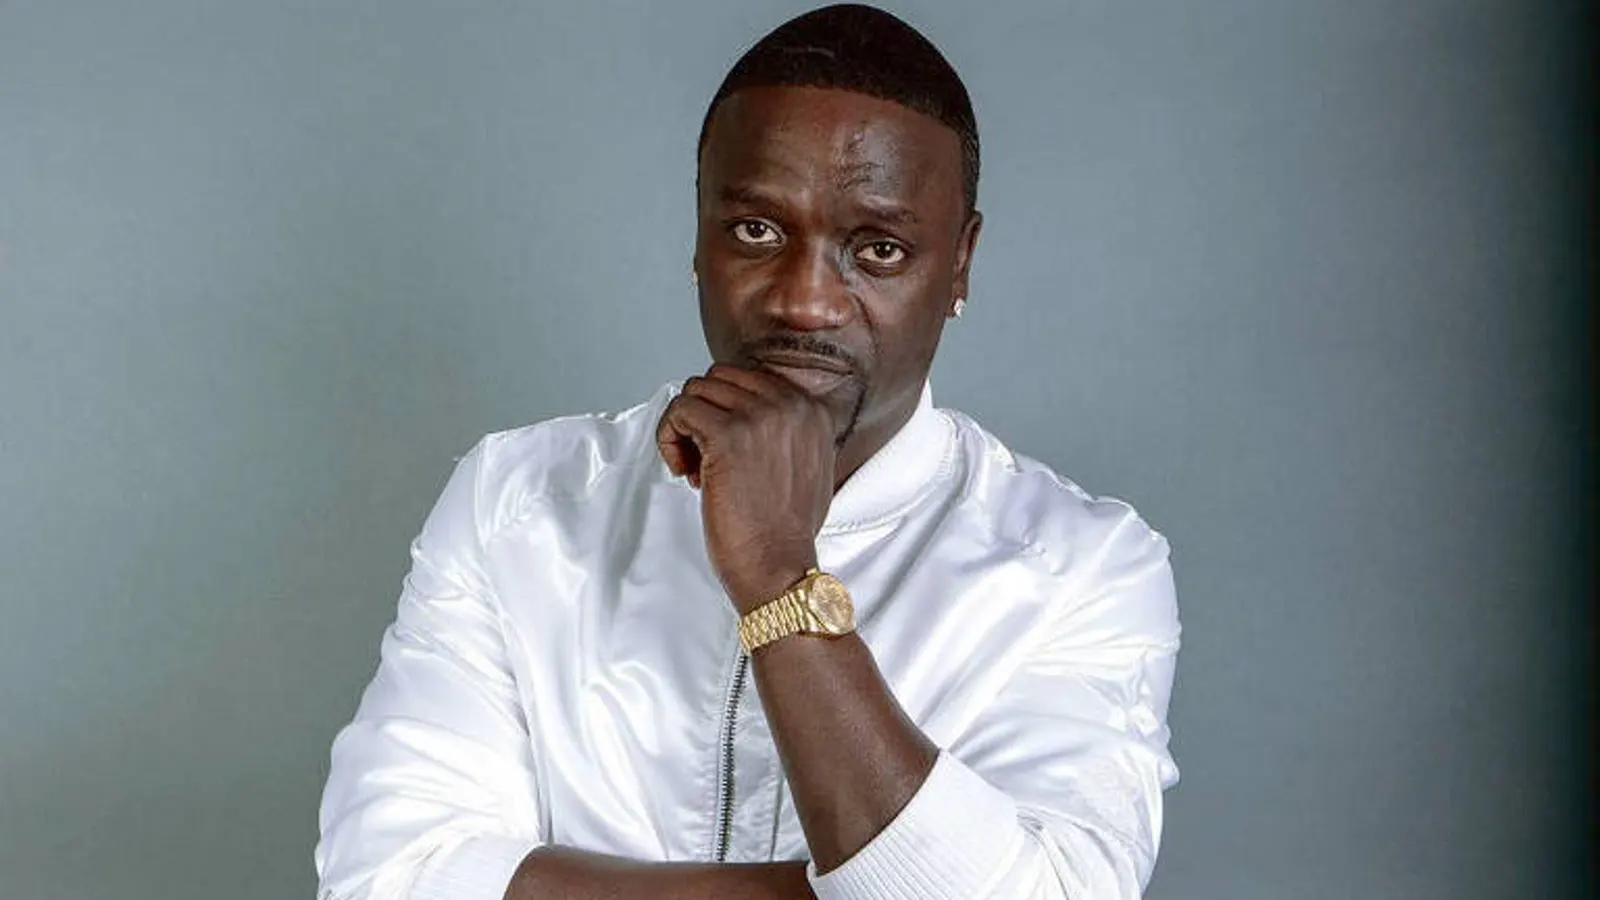 Akon defends Kanye's right to have his own opinions regarding the Nazis and Hitler